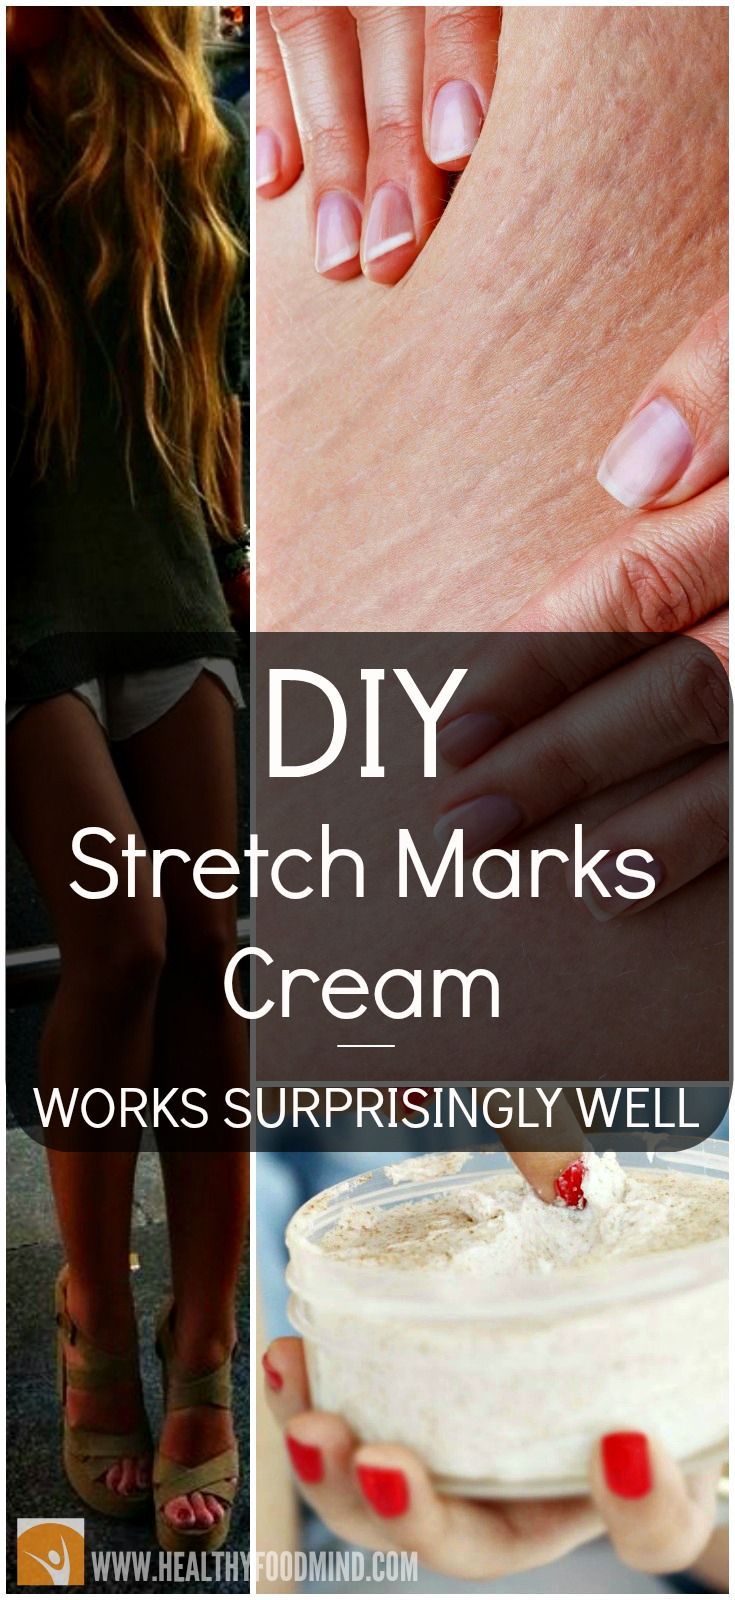 Here is a a recipe for a homemade stretch mark cream that successfully fights the stretch marks as well as cellulite.